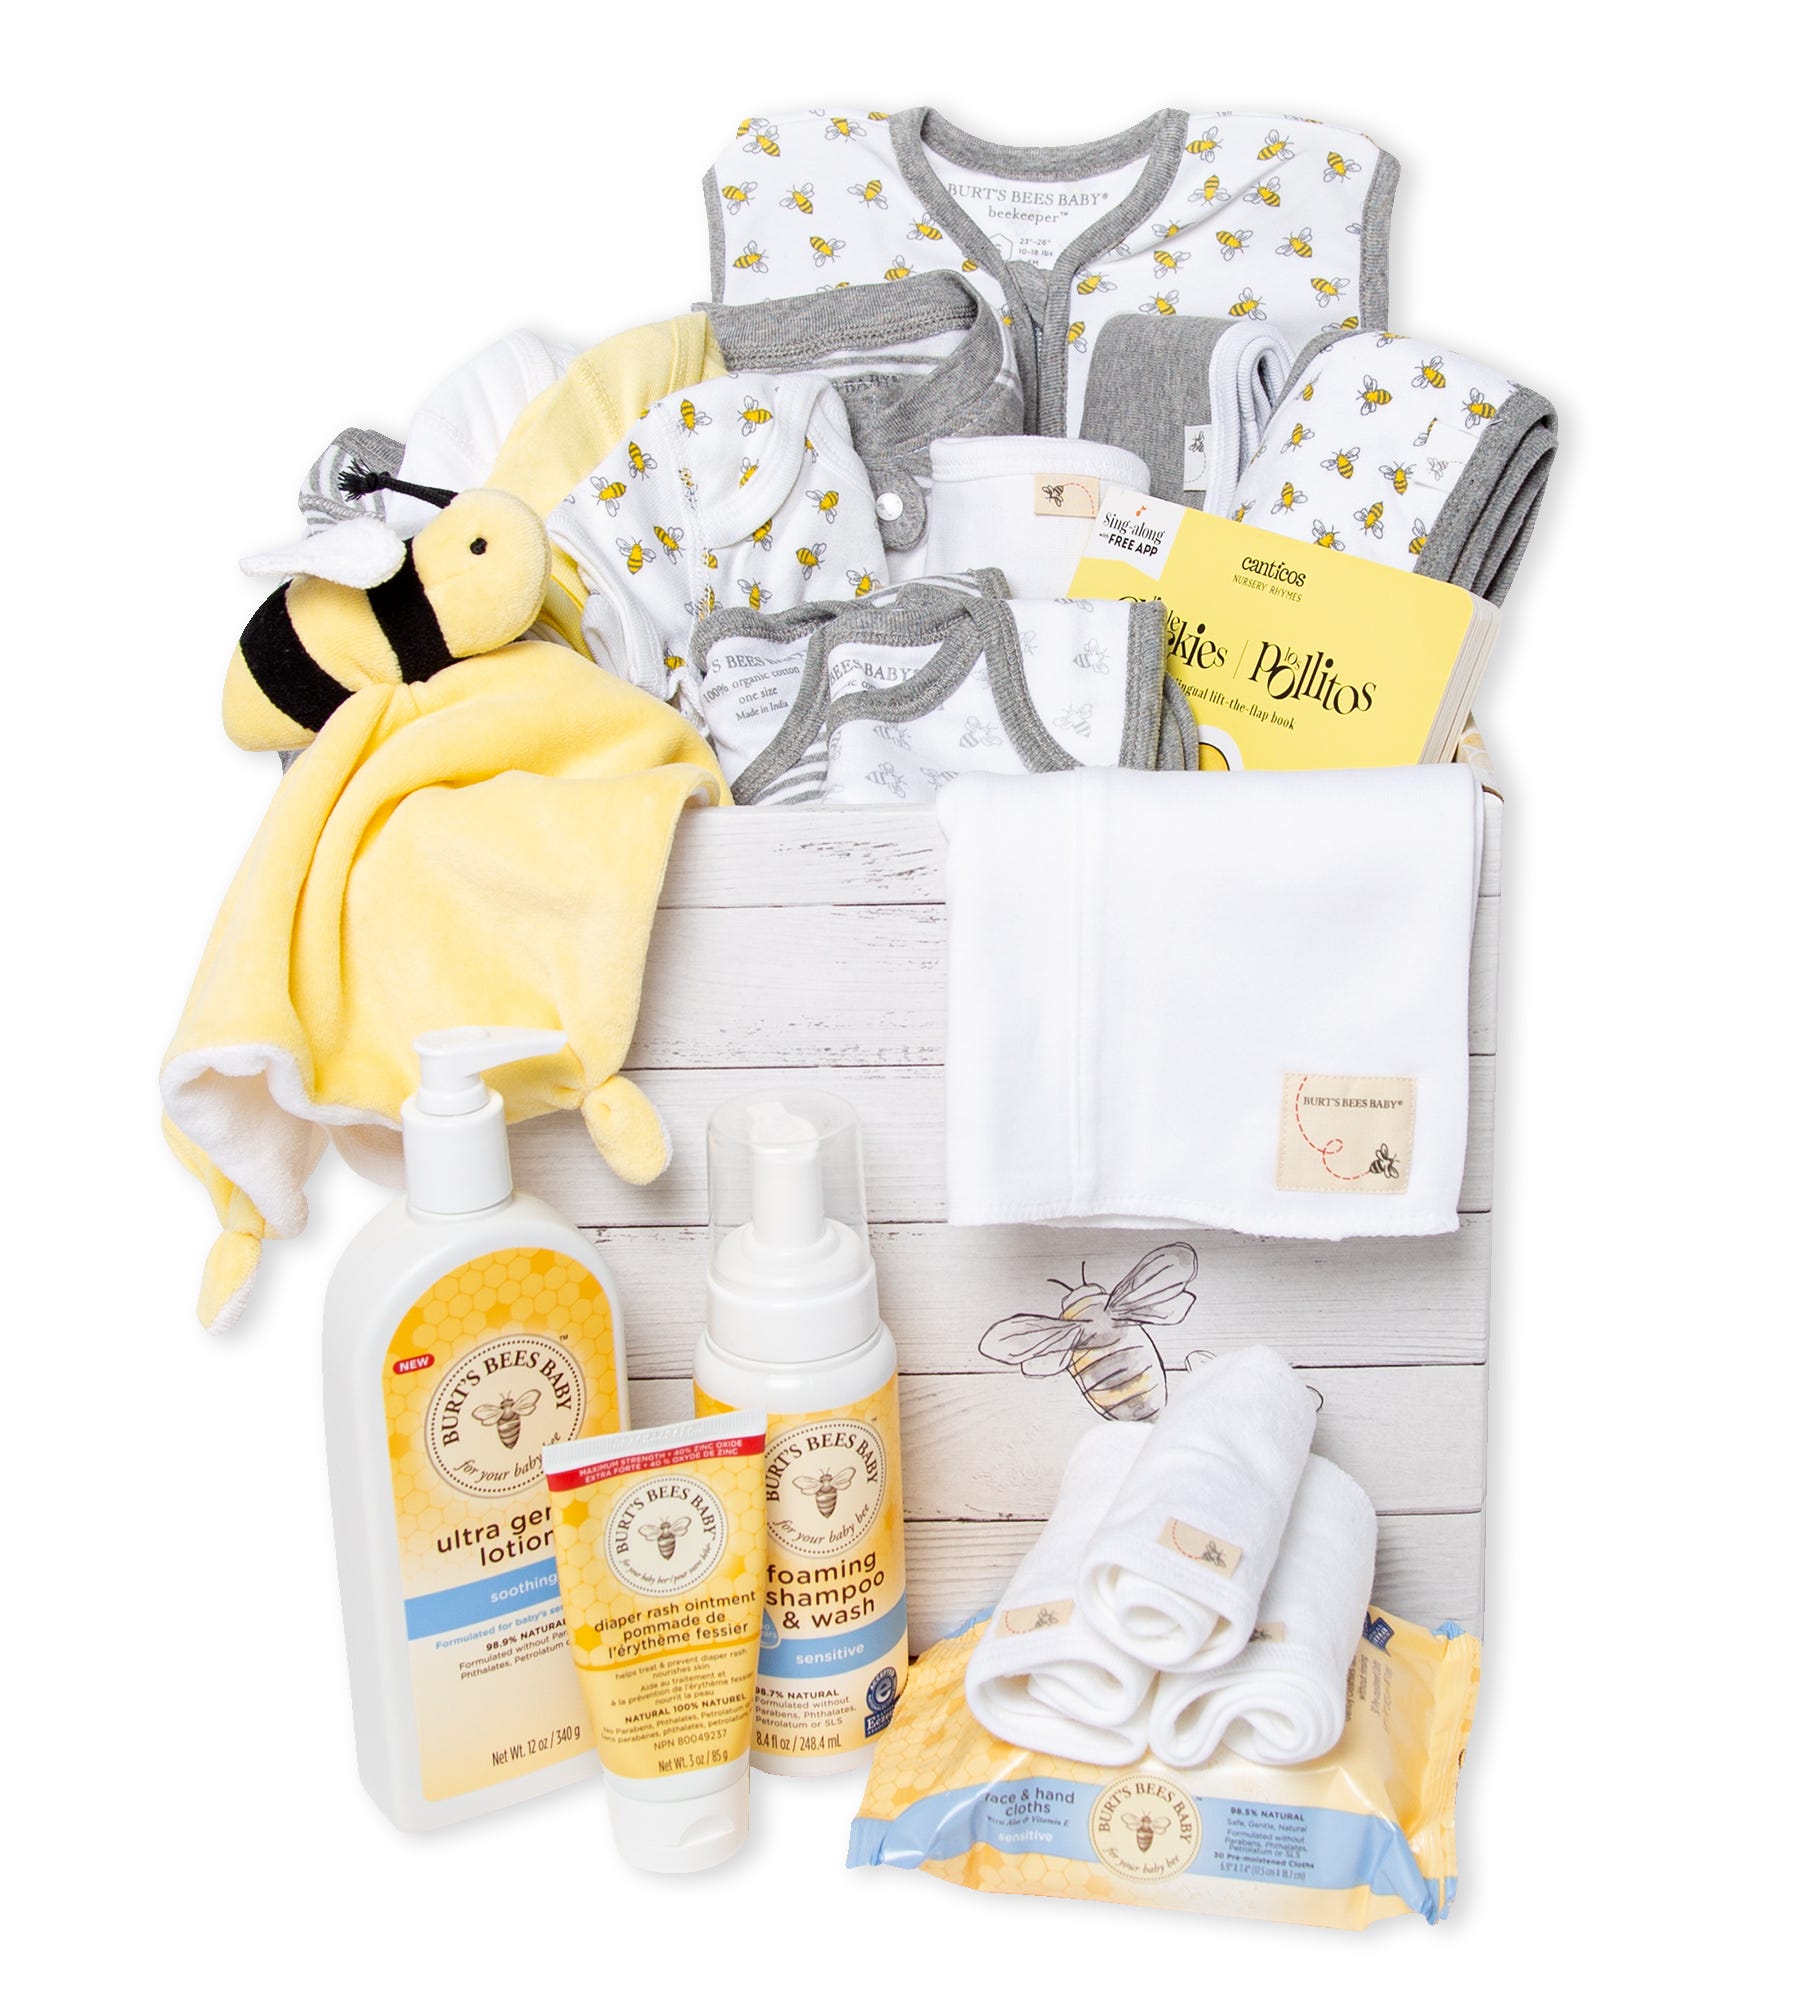 | The perfect gift for new moms